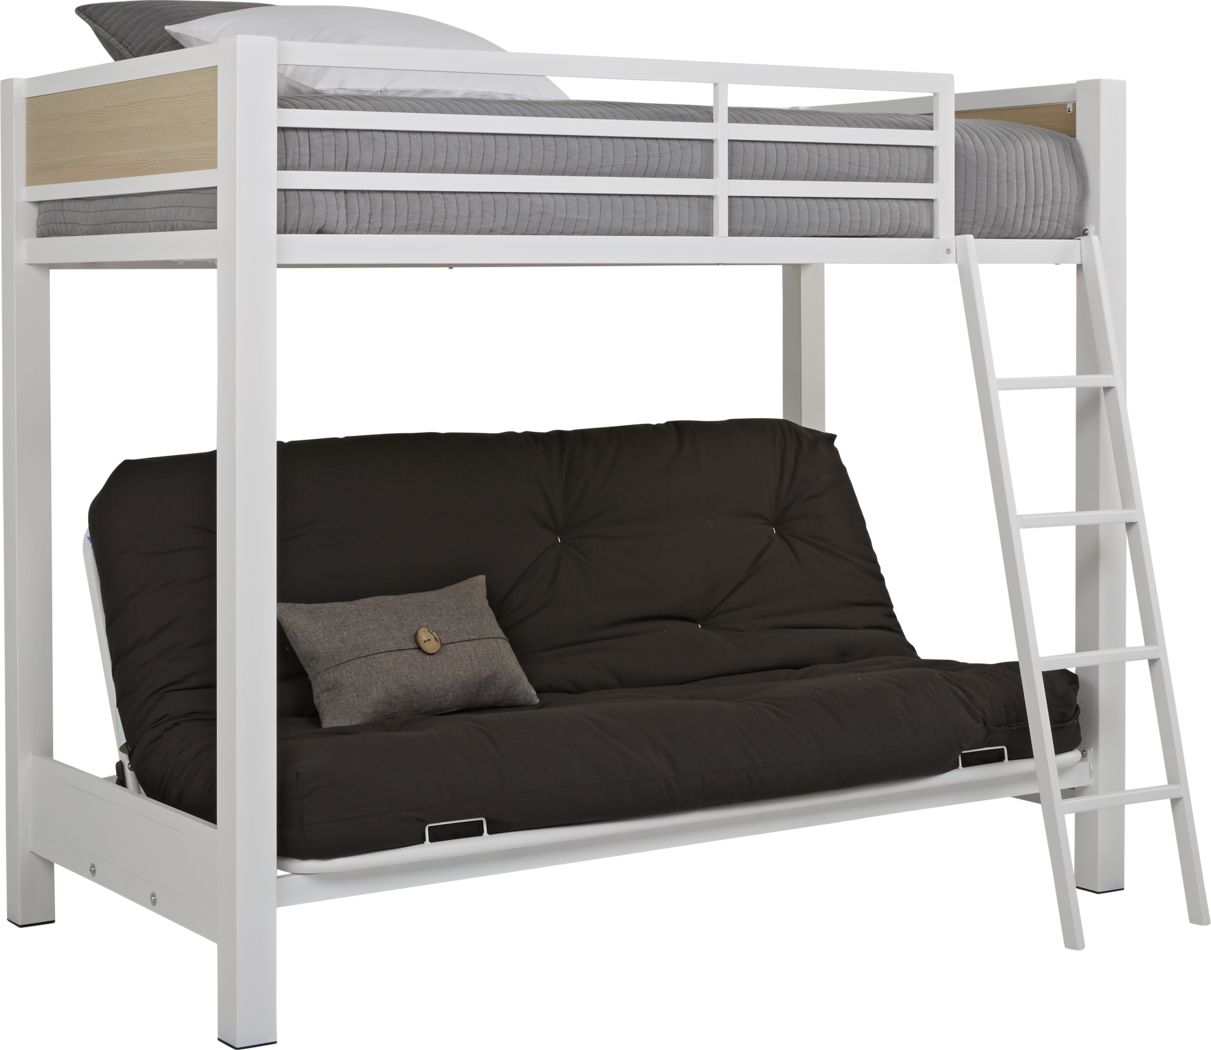 Bunk Beds For Kids, Triple Bunk Bed Rooms To Go